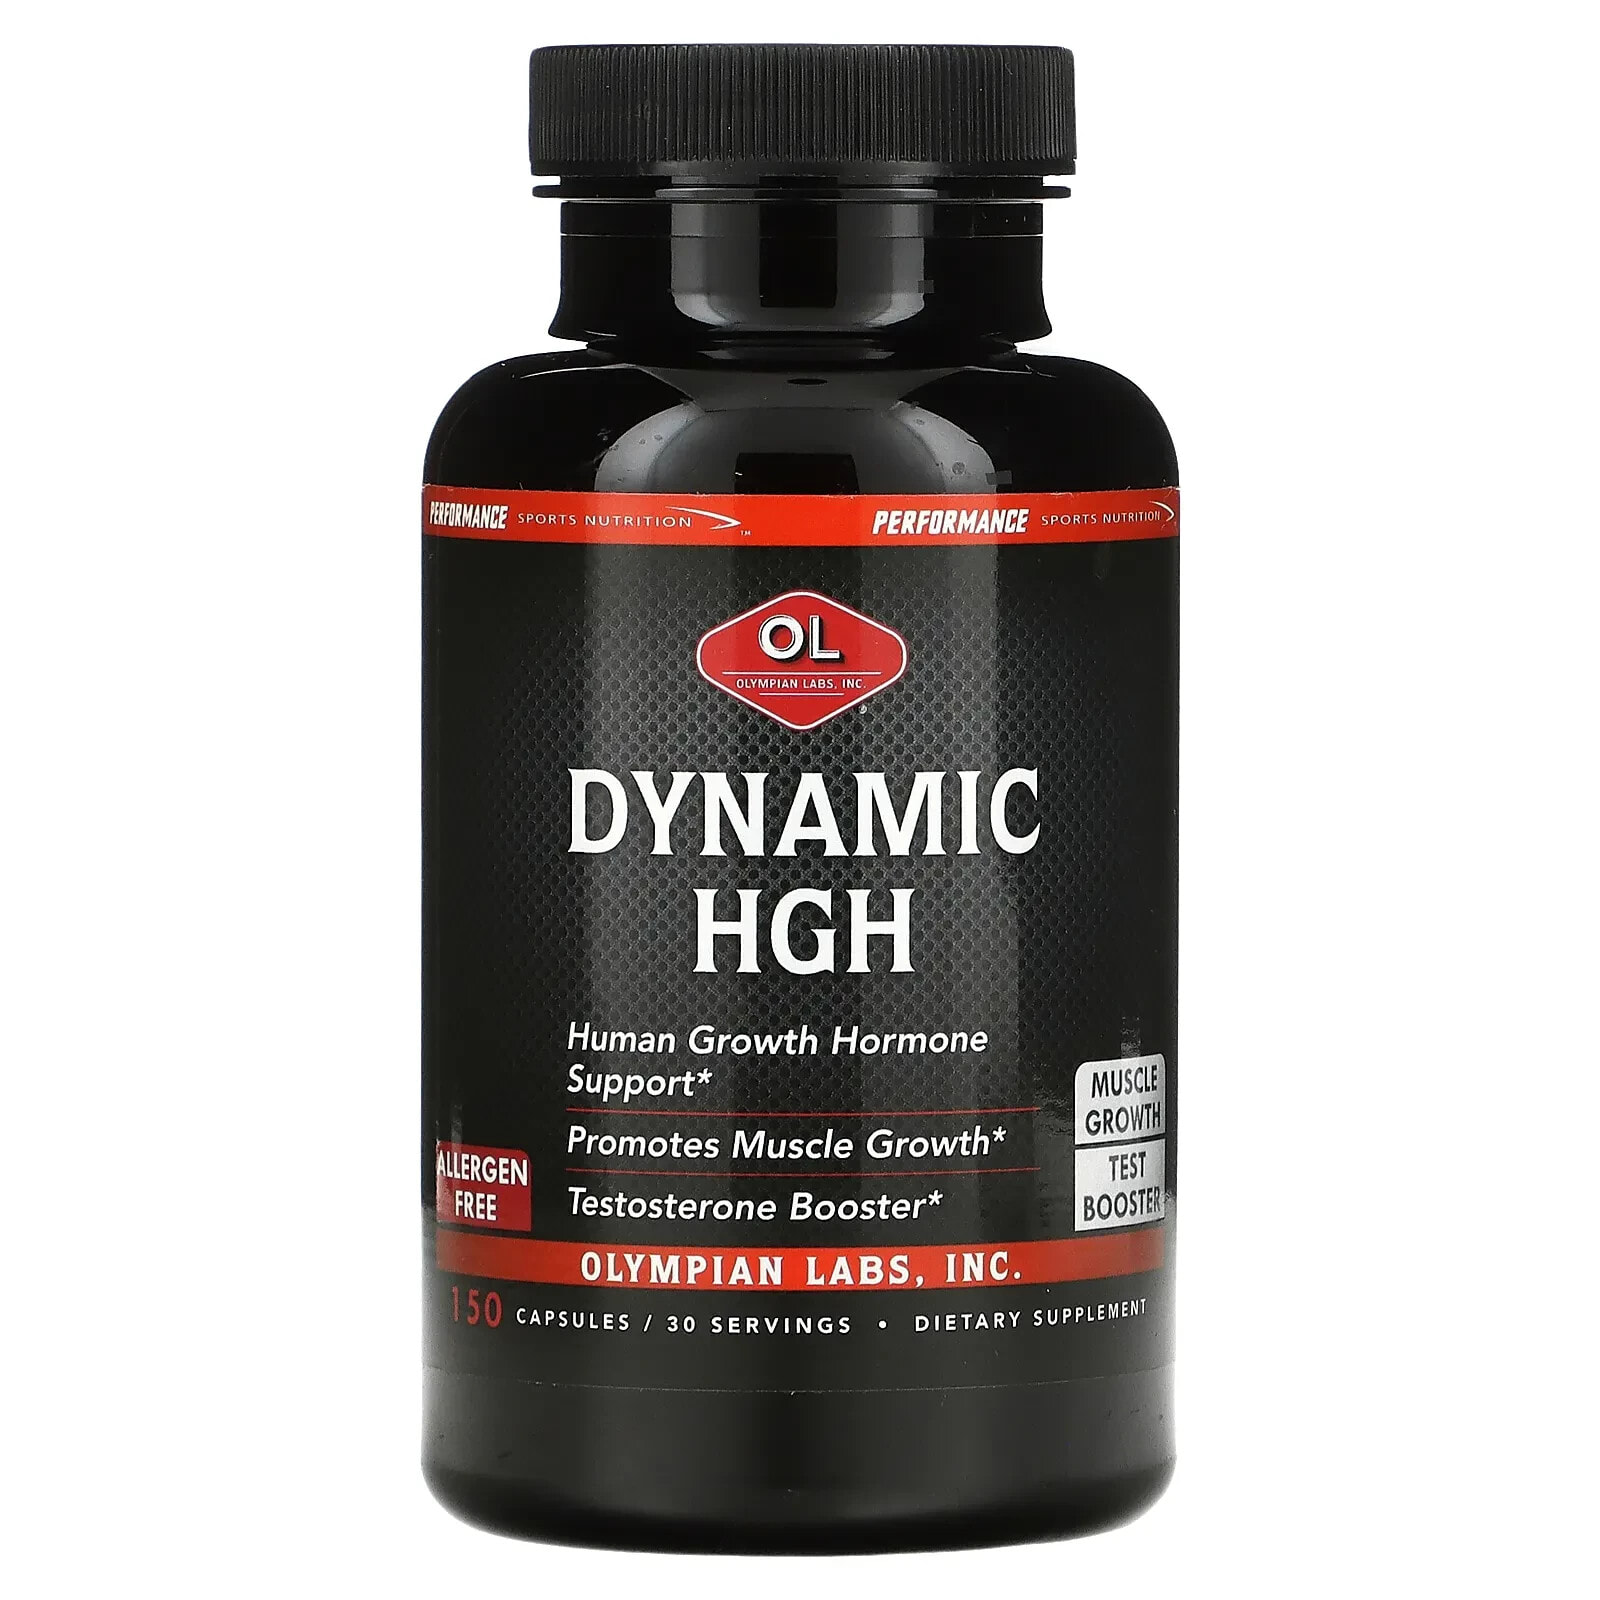 Olympian Labs Inc., Dynamic HGH, 150 Capsules